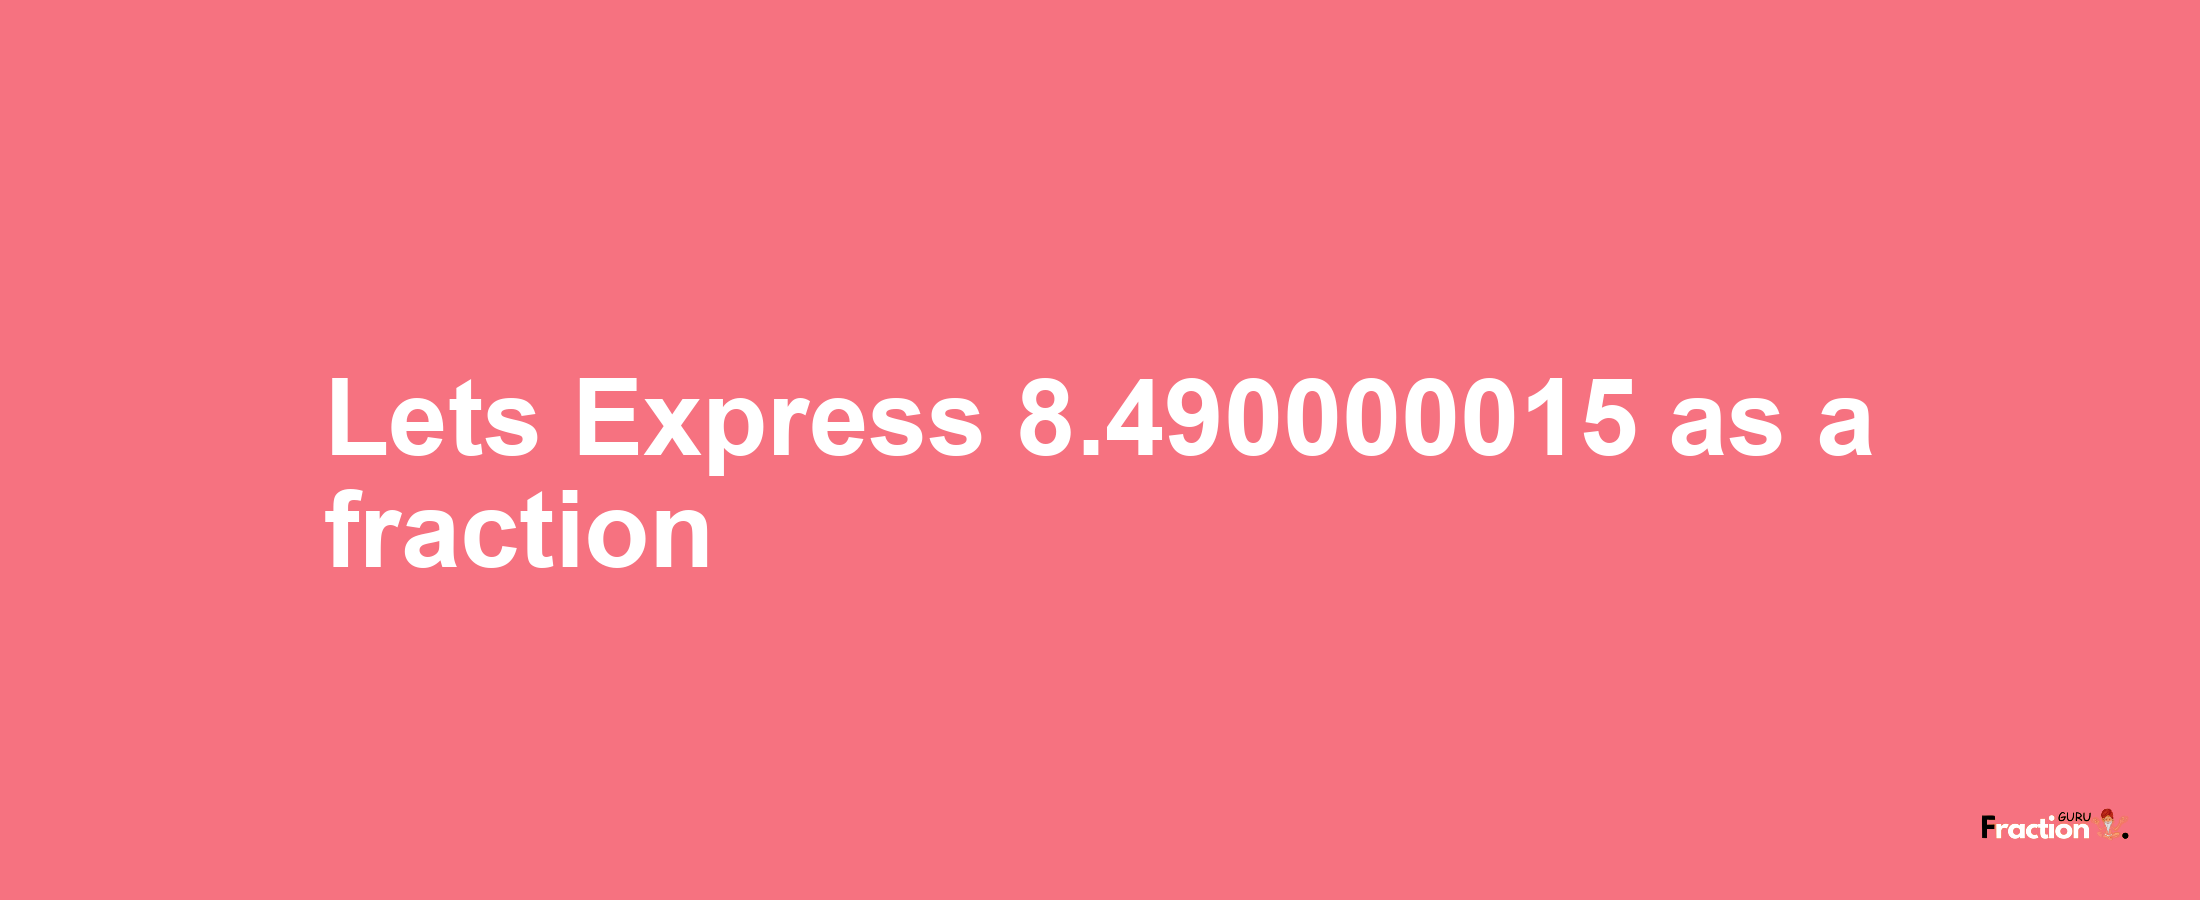 Lets Express 8.490000015 as afraction